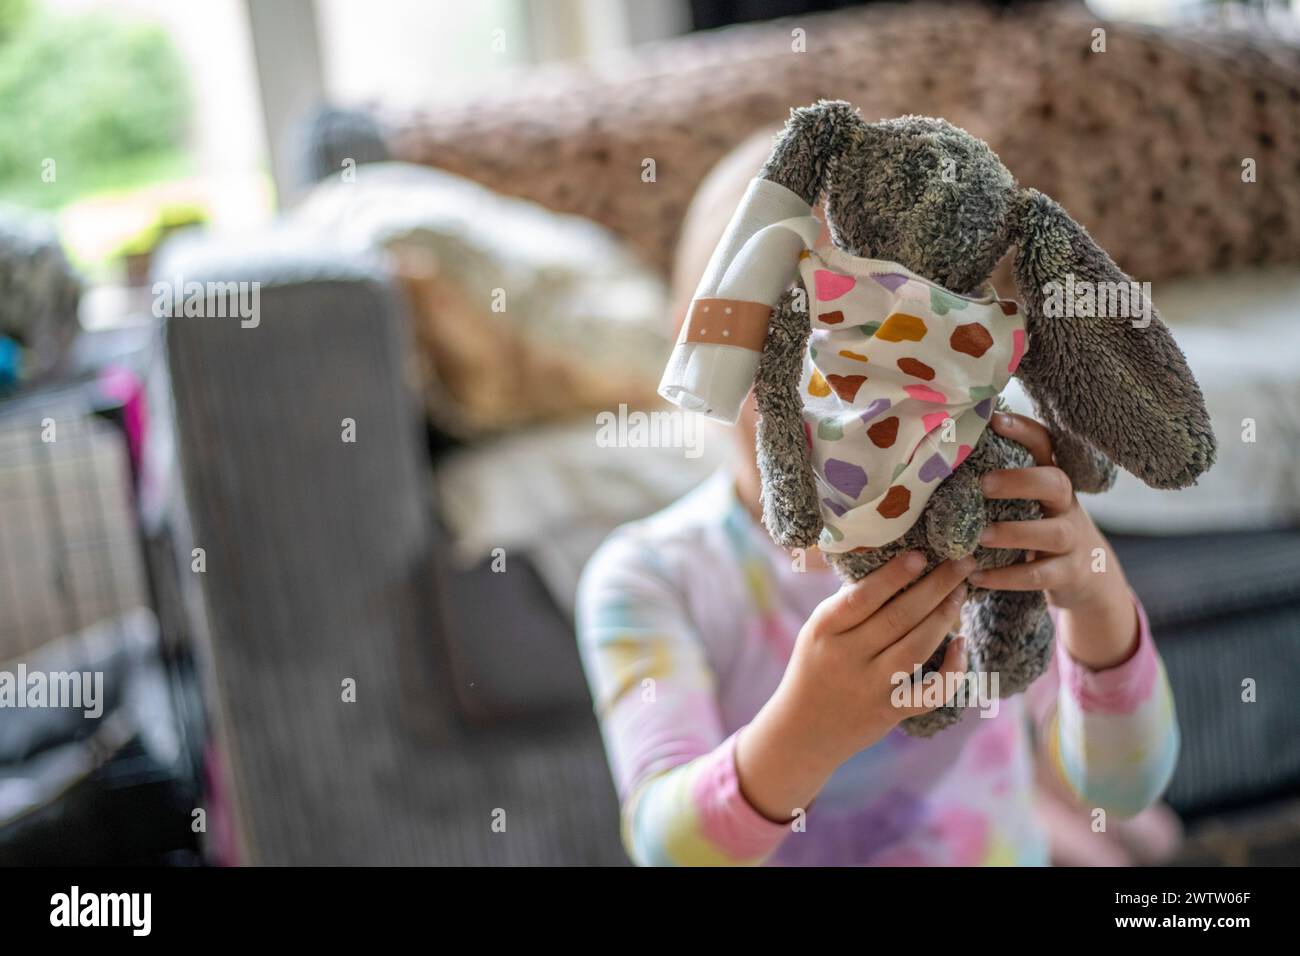 Child playing hide and seek with a stuffed bunny. Stock Photo